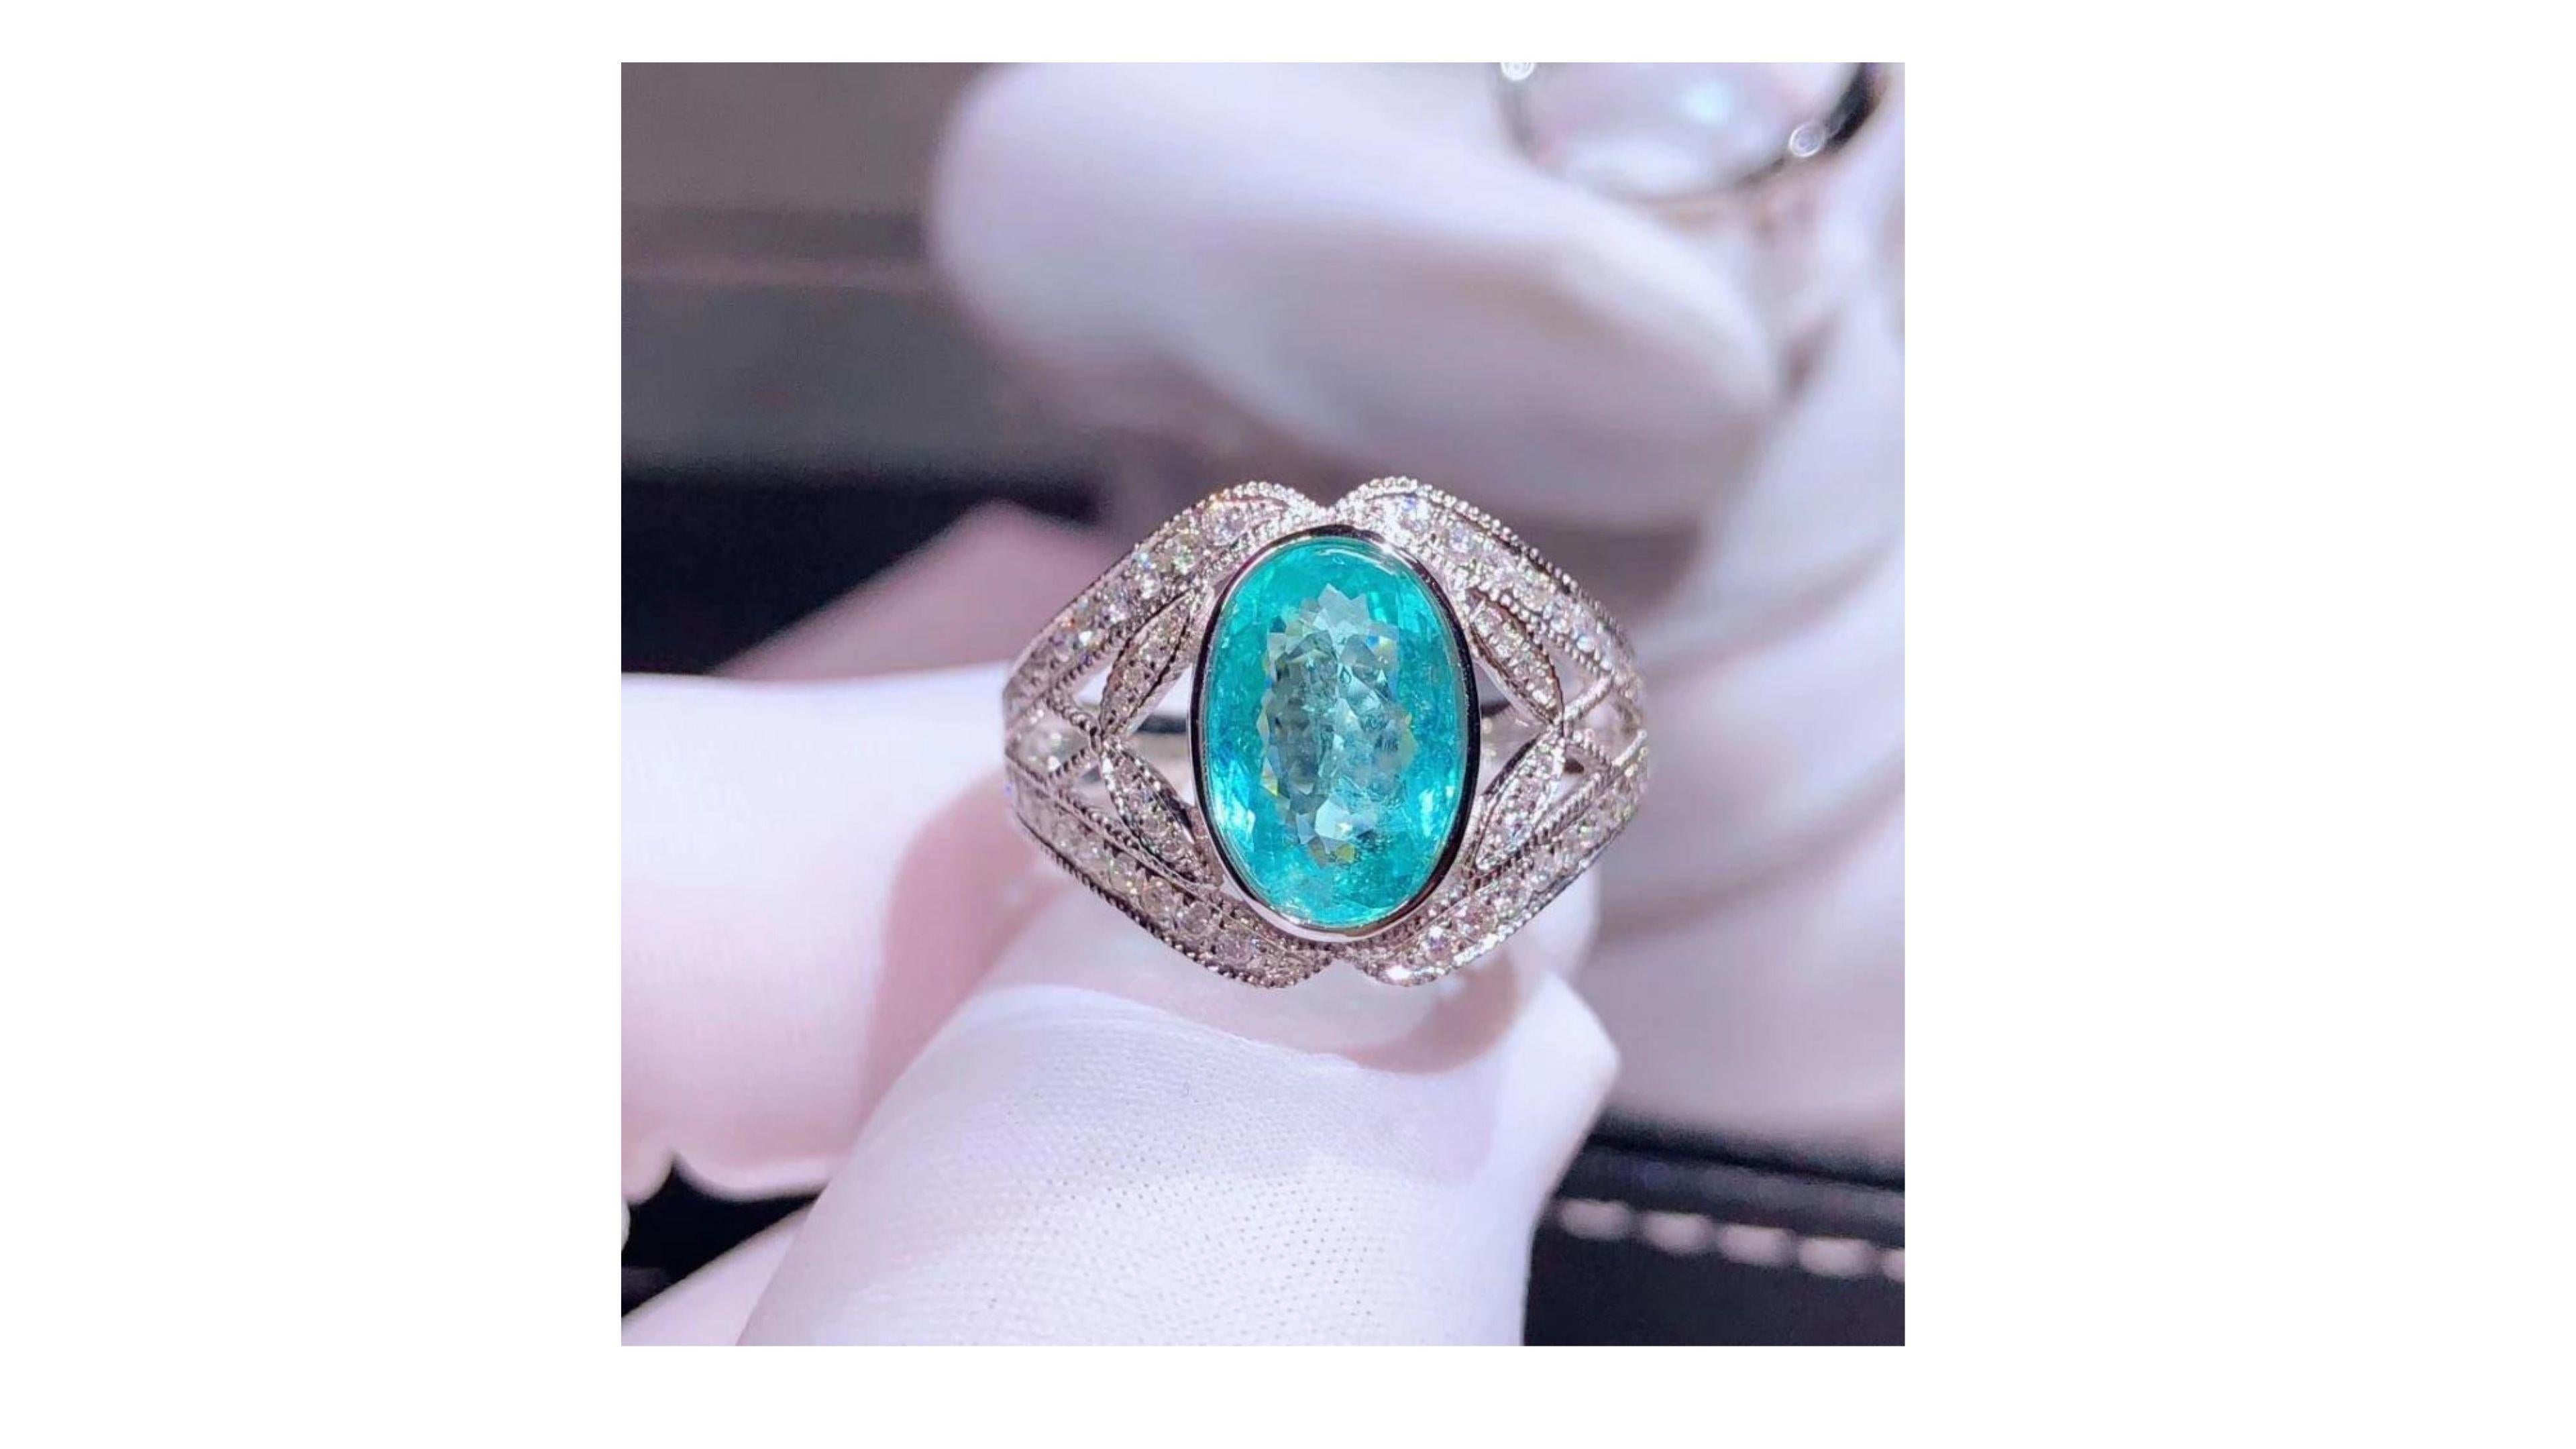 

This is rare Pariba Tourmaline Ring at 2.22ct with 36 diamonds set in 18k white gold

The story of this neon-bright tourmaline’s discovery is as intriguing as the stone itself. Hidden for many years beneath hills in the north-eastern Brazilian